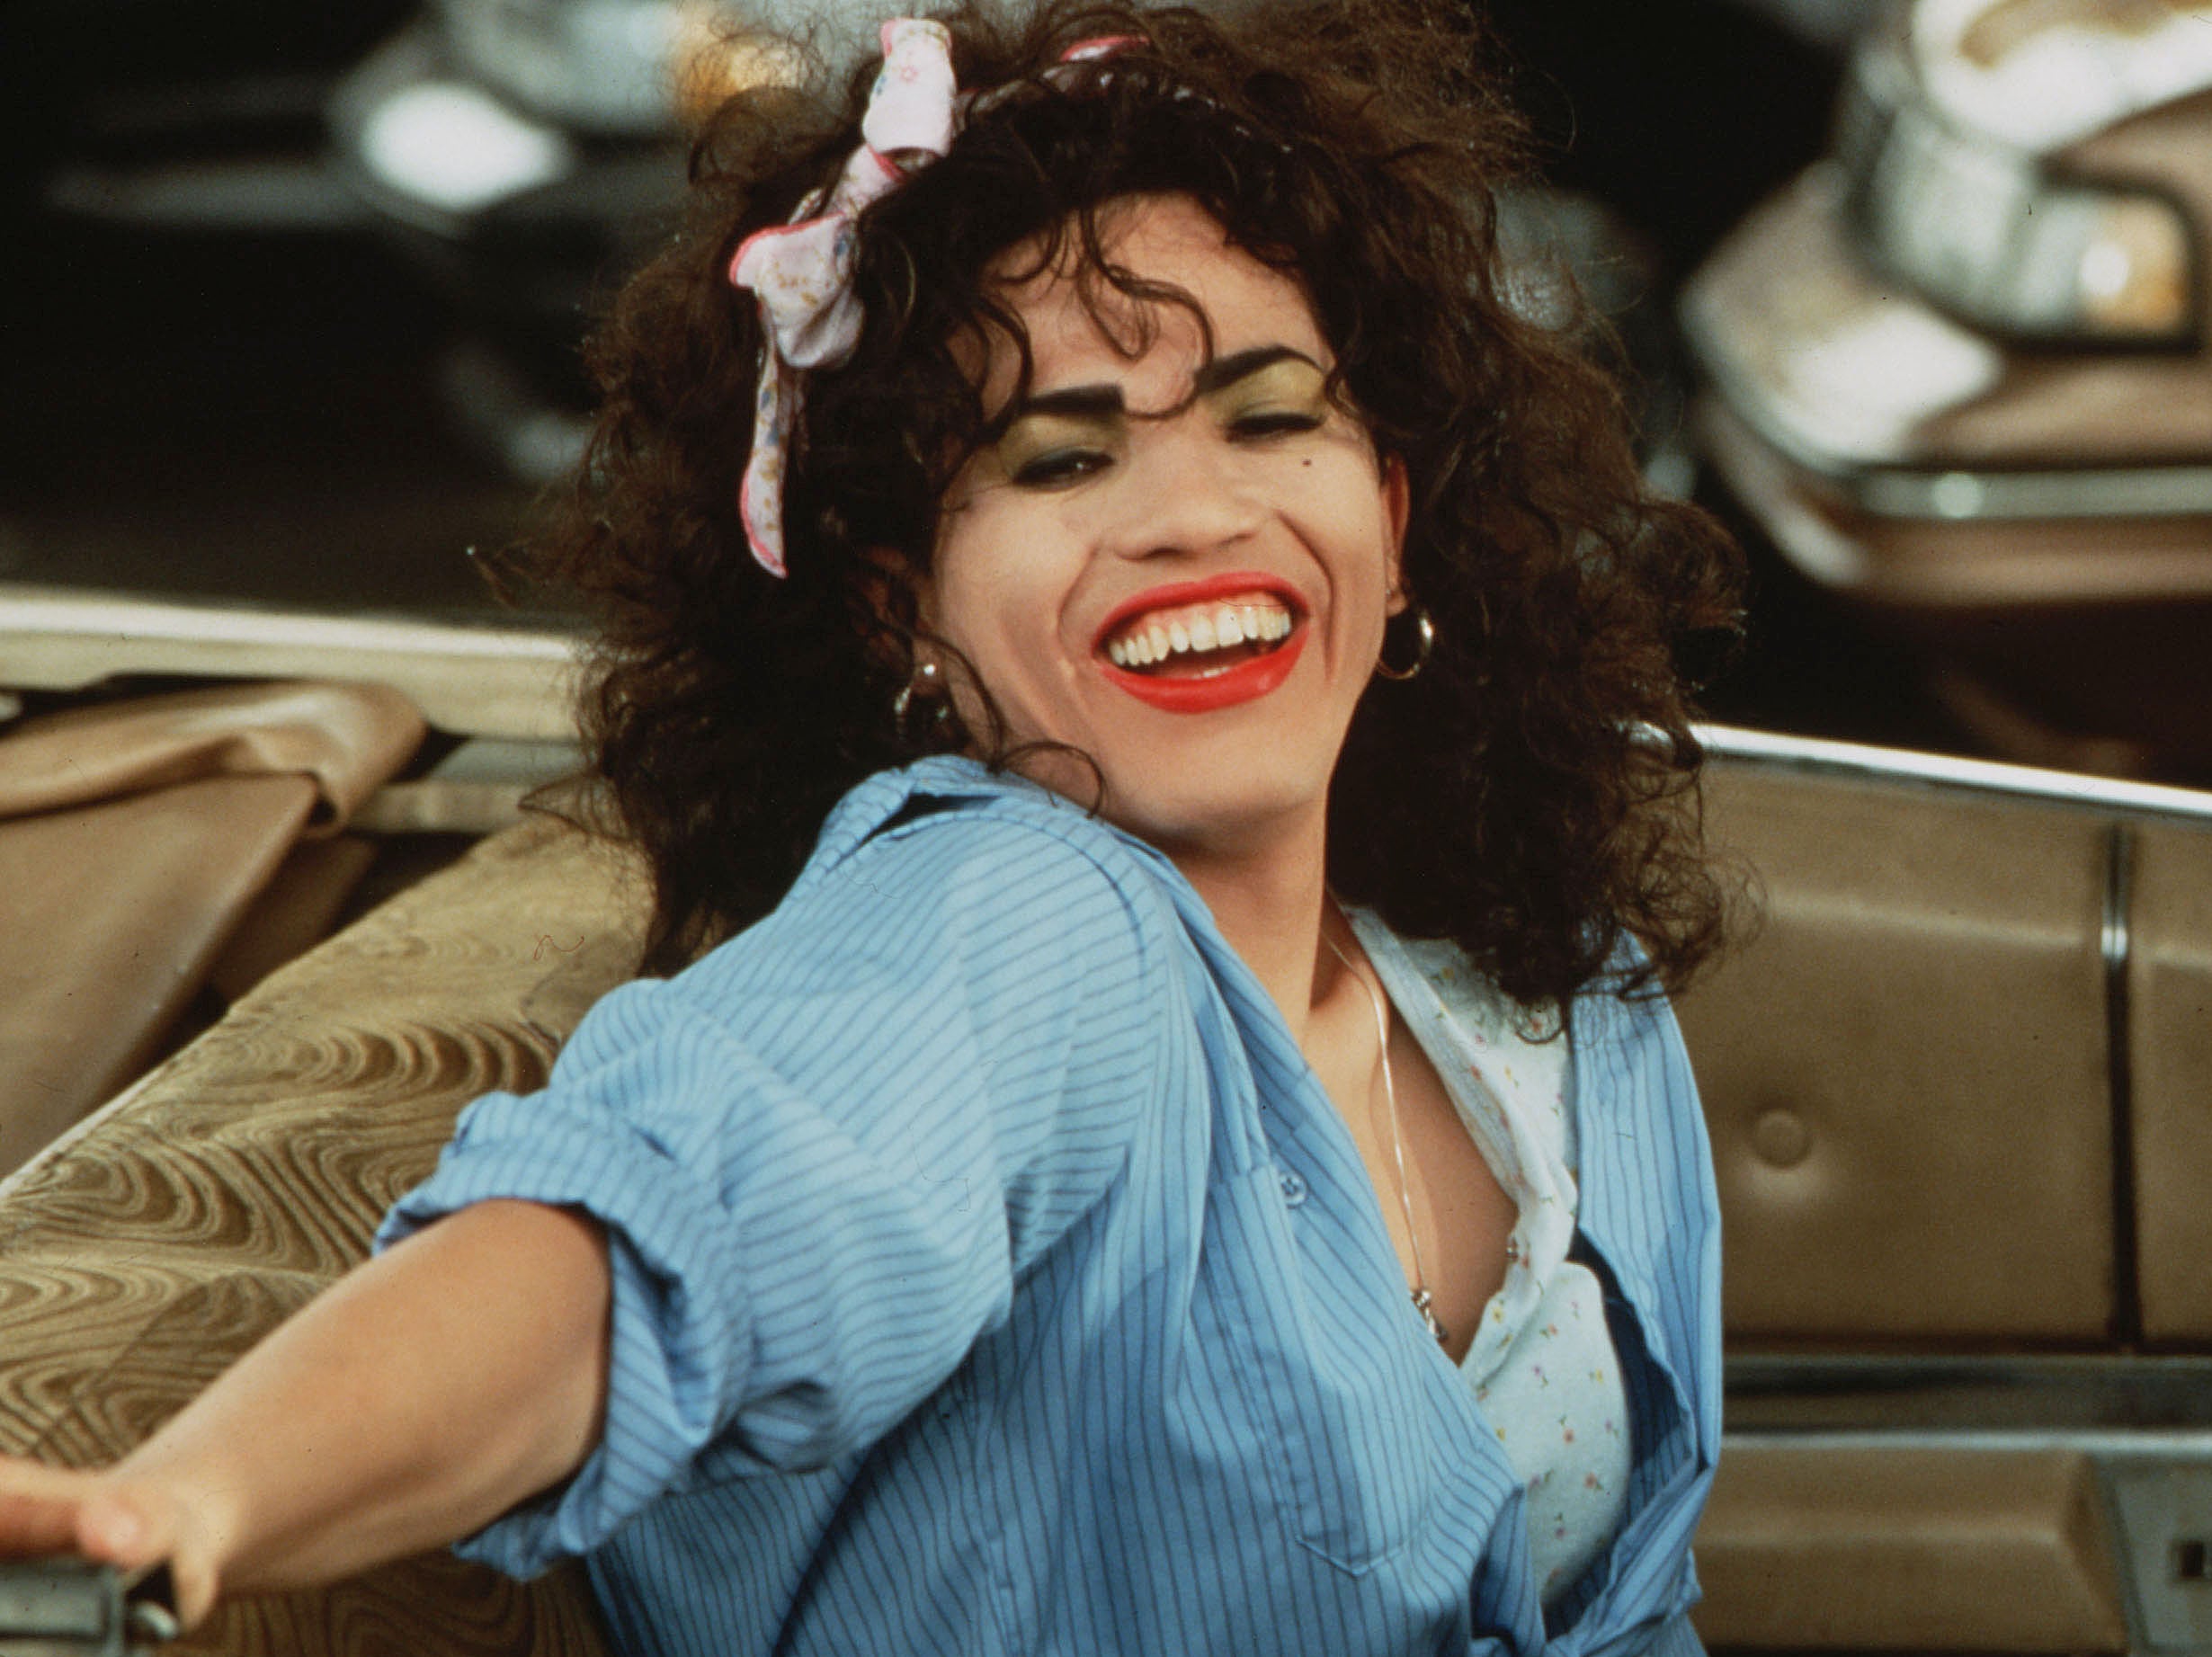 John Leguizamo as Chi-Chi Rodriguez in the 1995 comedy 'To Wong Foo, Thanks for Everything! Julie Newmar'